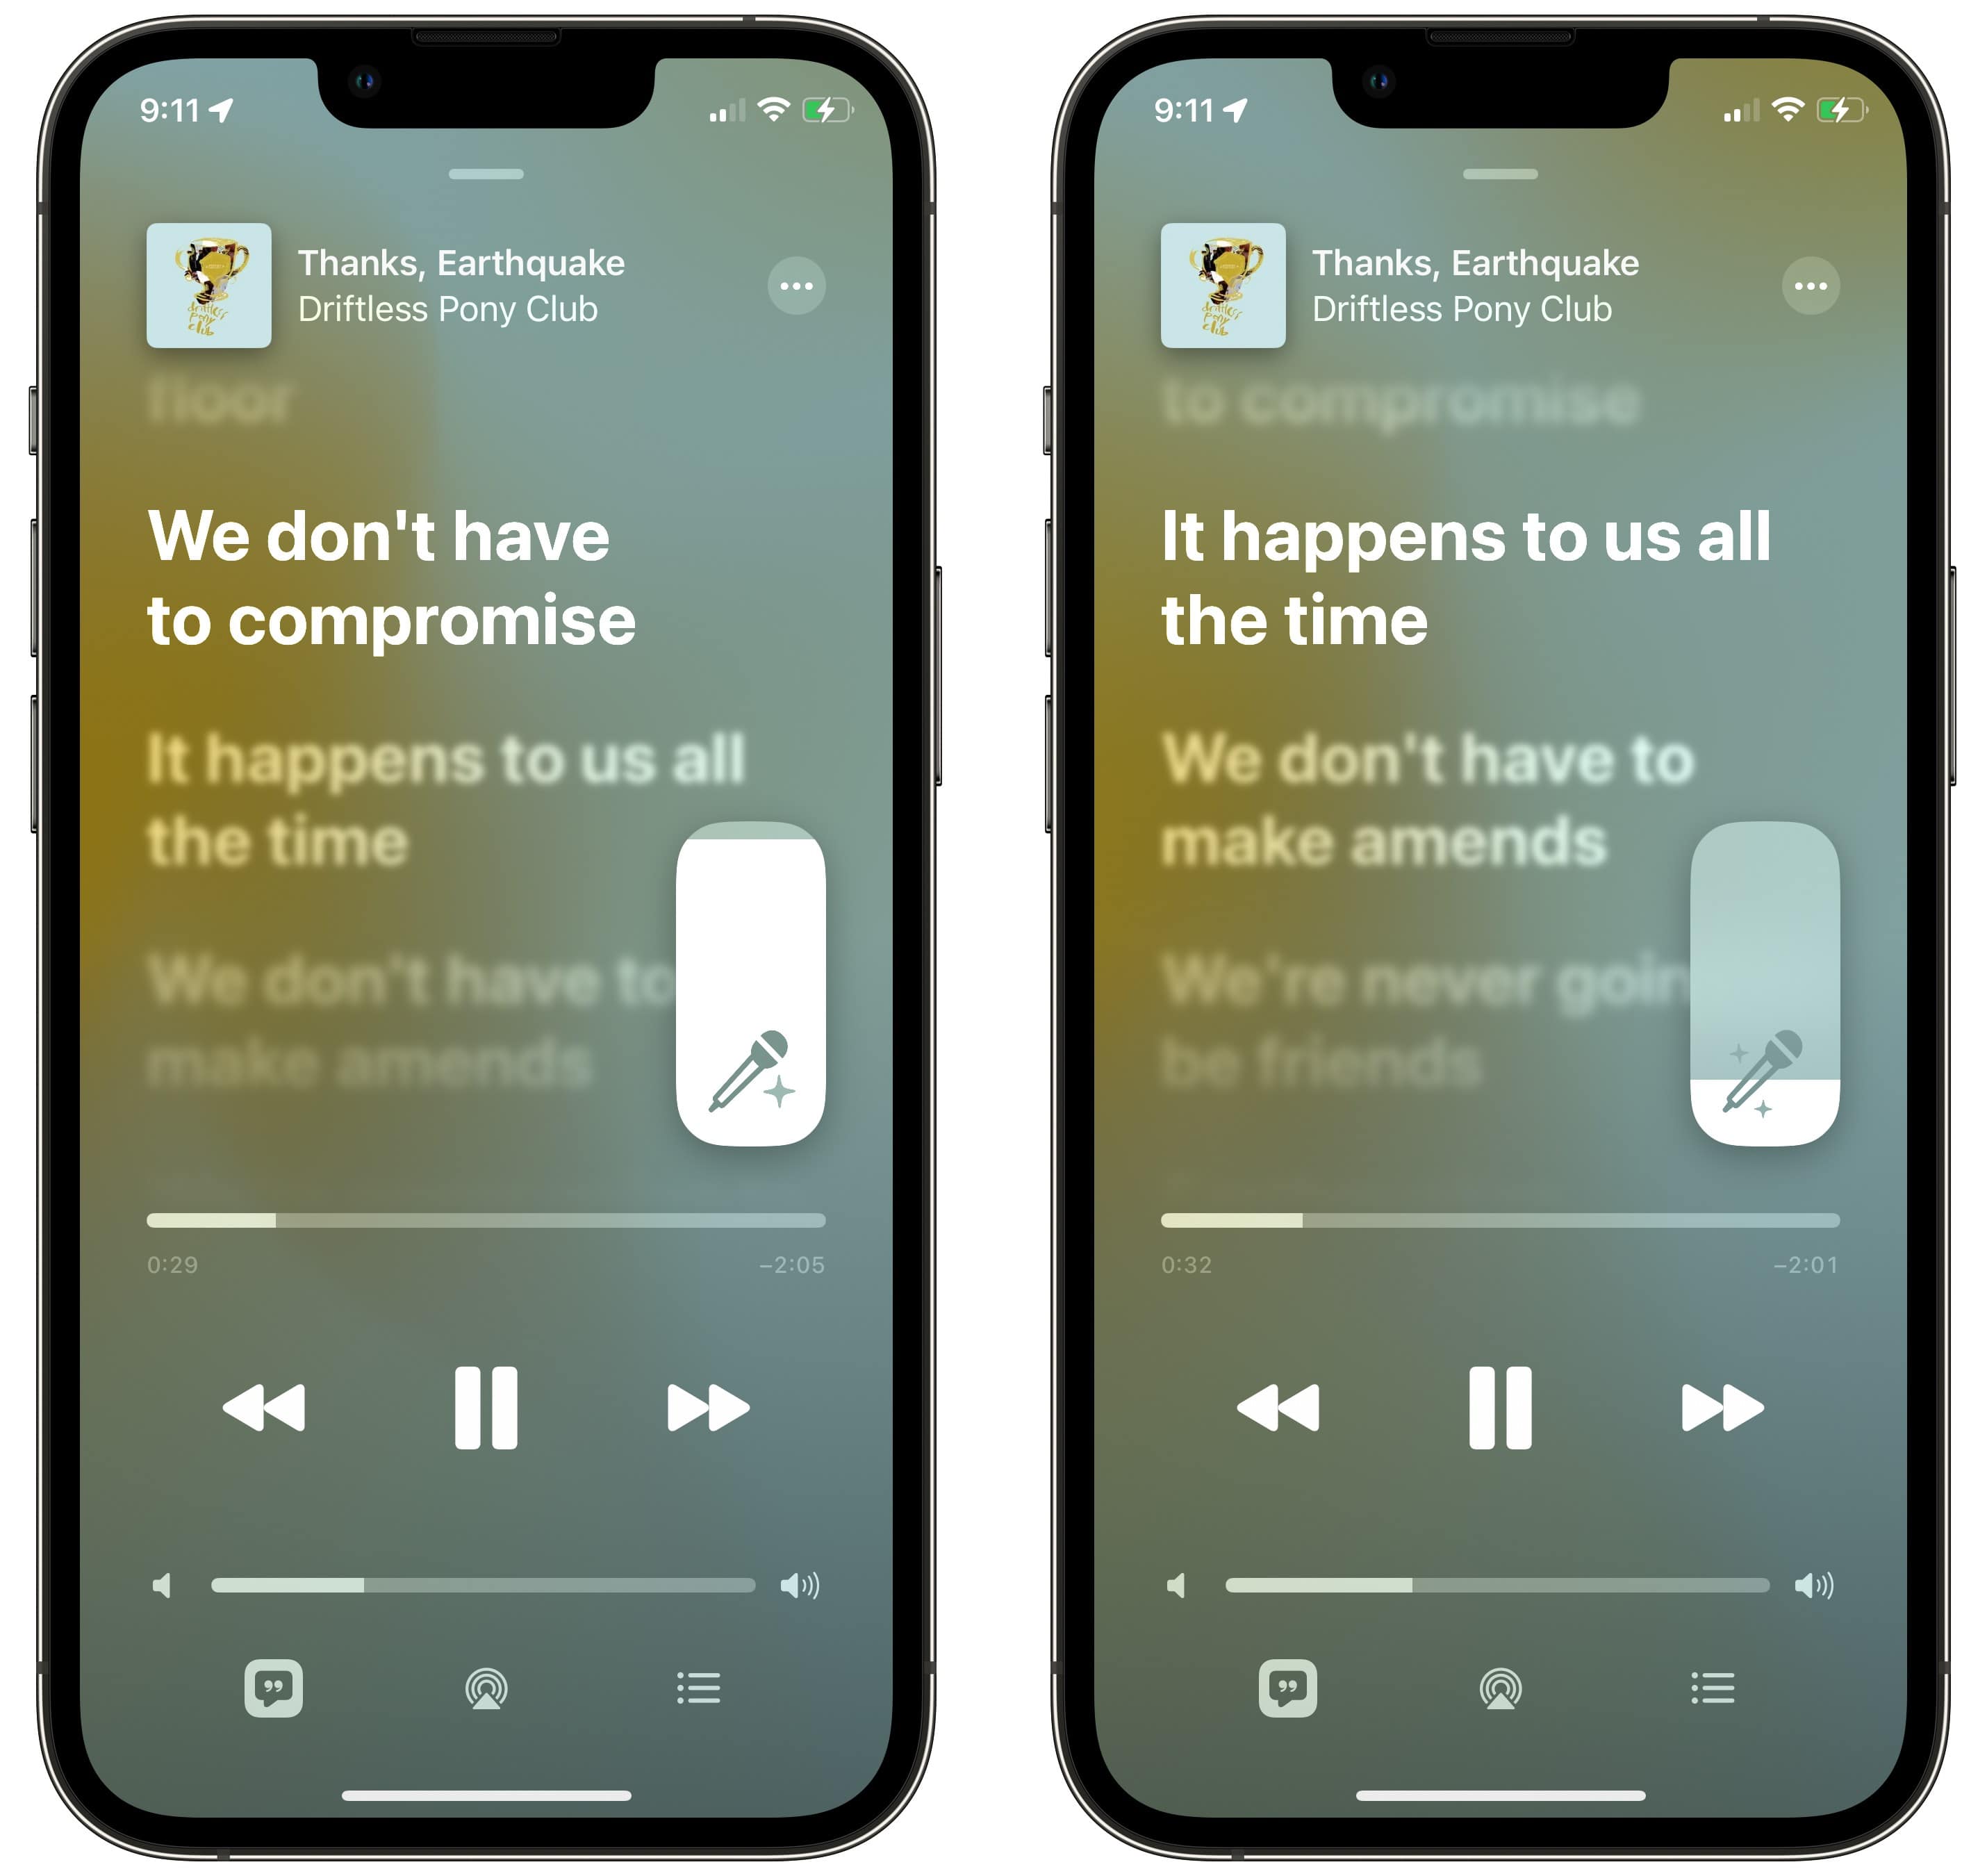 Turning up and down the lyrics on a song in Apple Music Sing: Slide up and down on the microphone icon to adjust the volume of the lyrics.